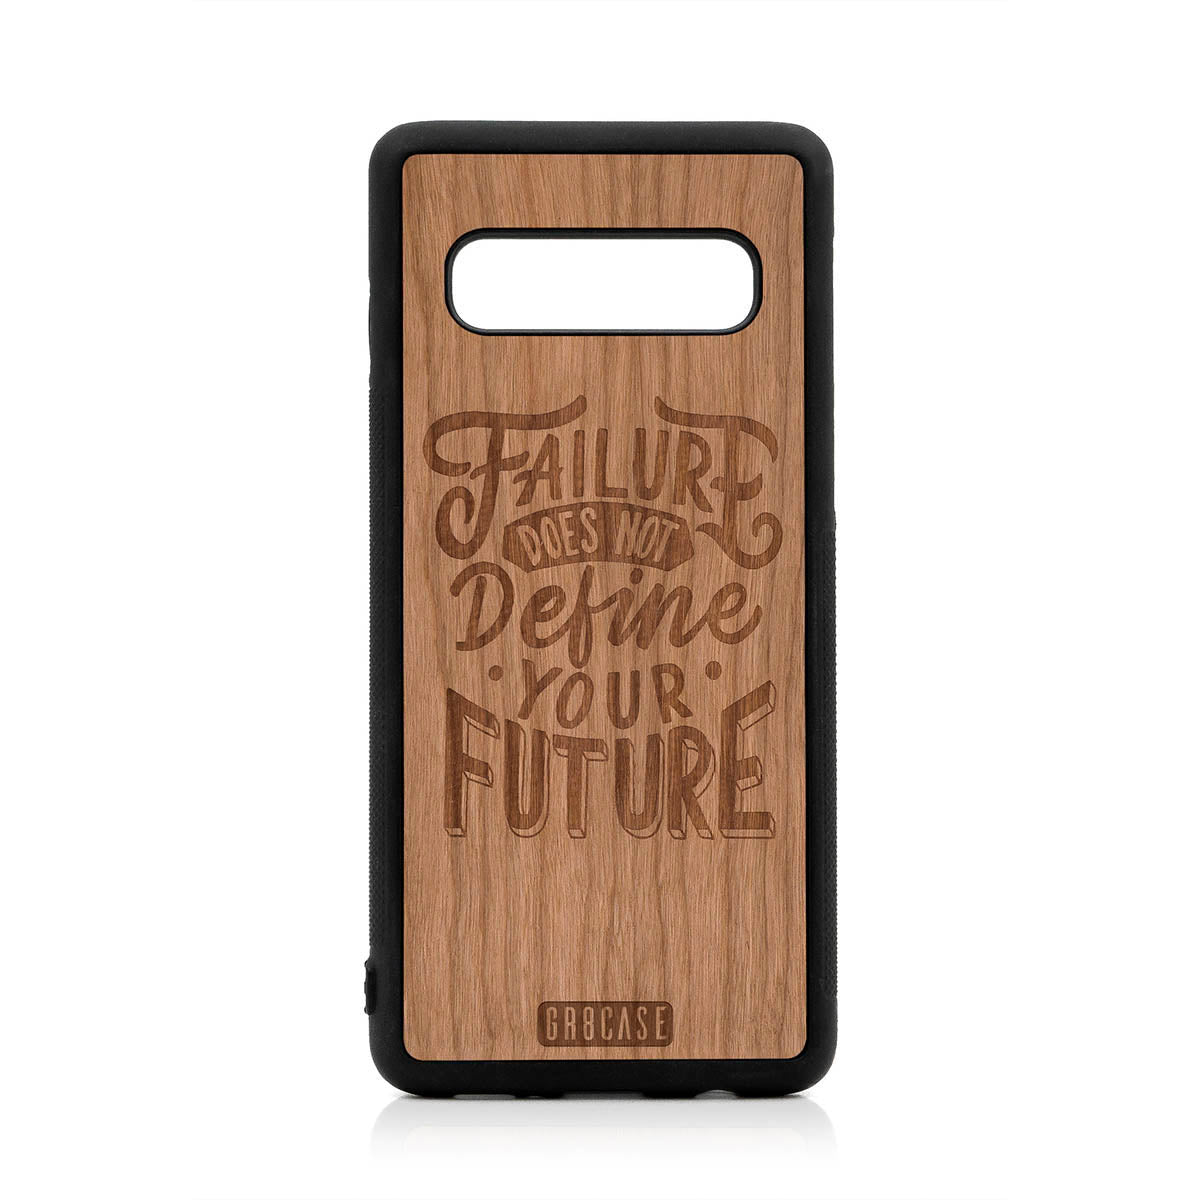 Failure Does Not Define You Future Design Wood Case For Samsung Galaxy S10 by GR8CASE